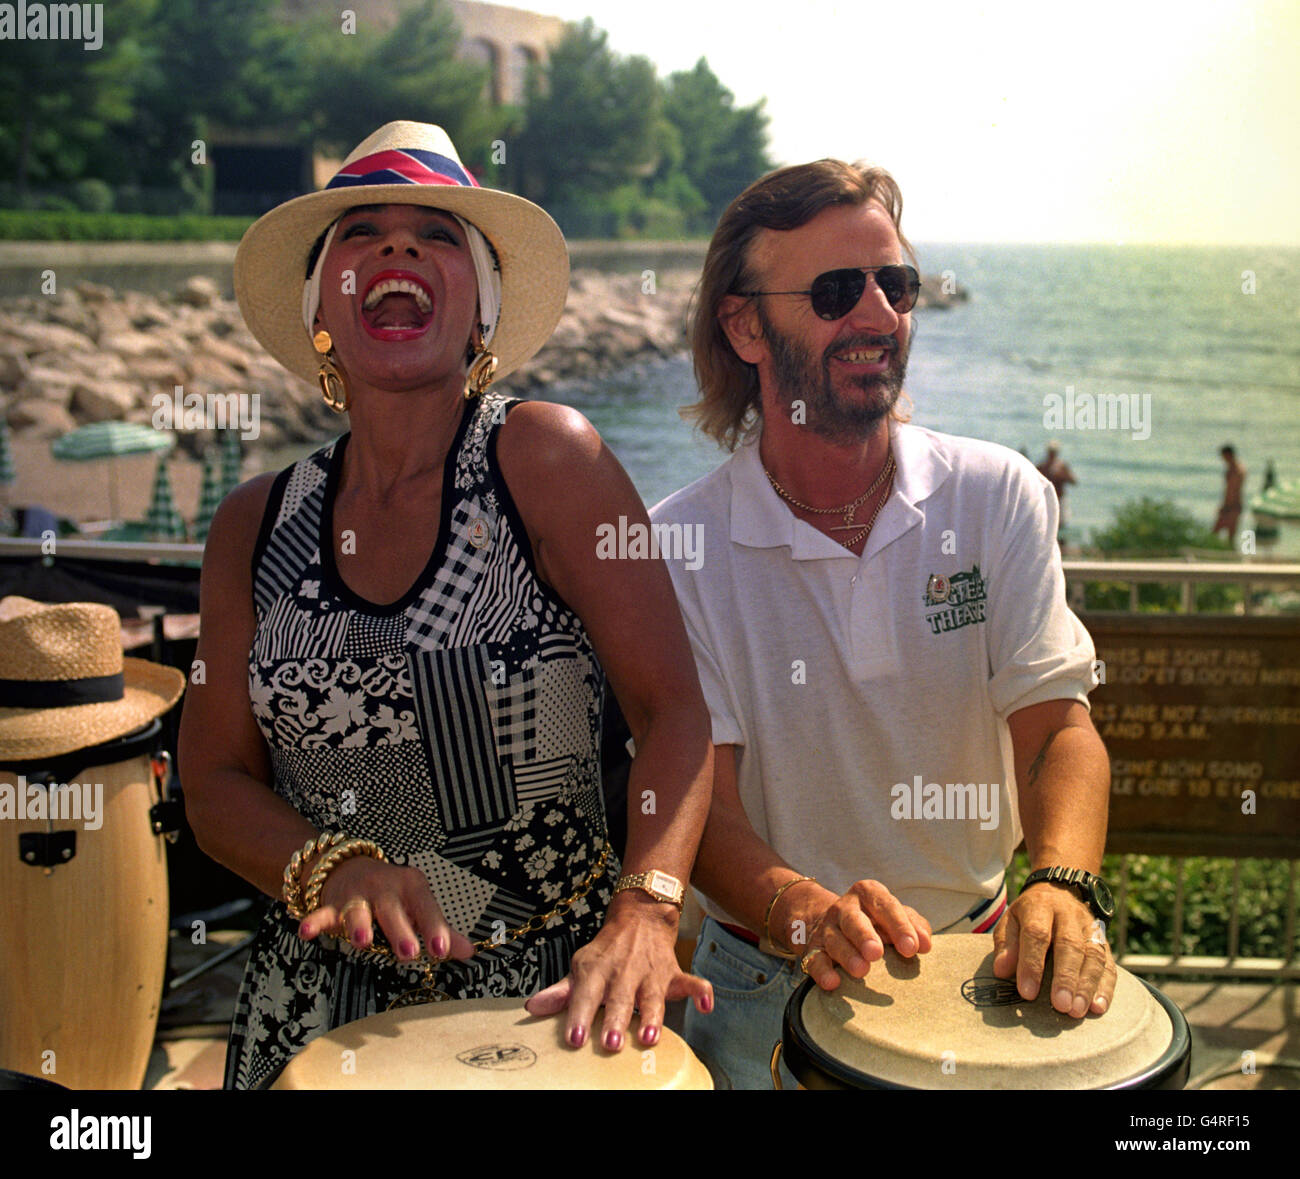 Singer Shirley Bassey joins Ringo Starr on the Bongos at a beach party in Monte Carlo to promote Manchester's Olympic bid. It was unsuccessful. Stock Photo